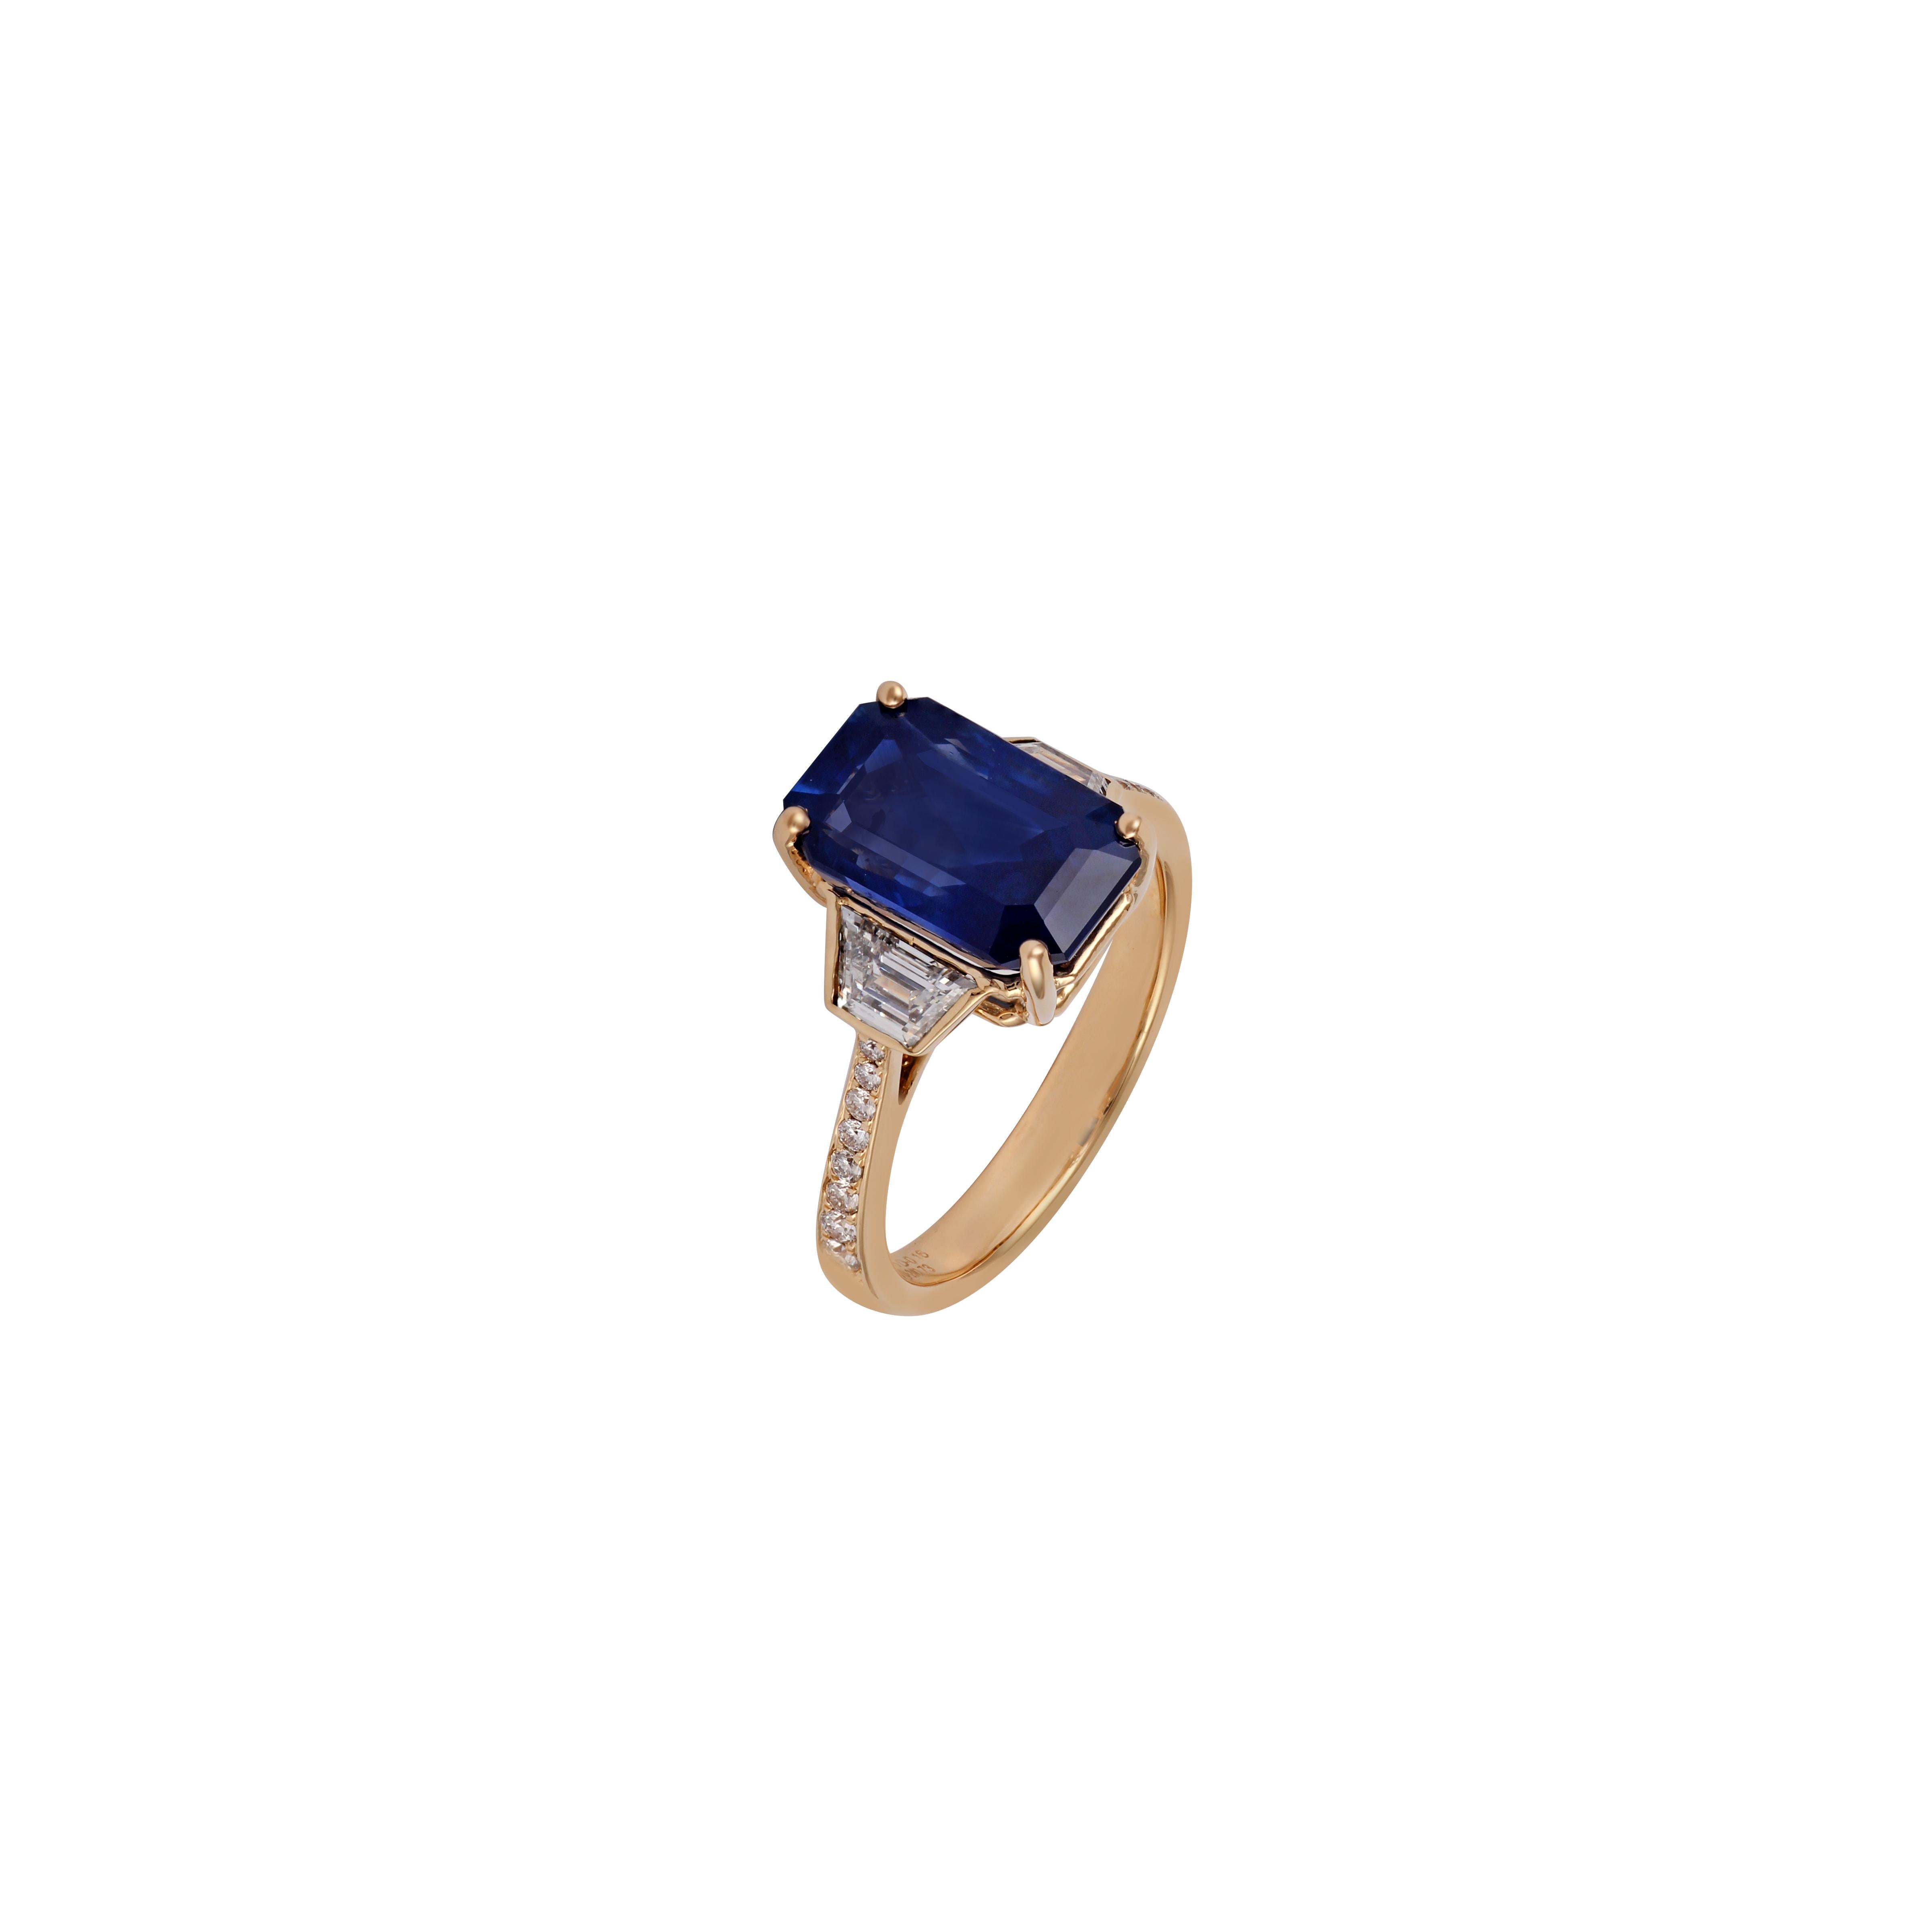 Mixed Cut 6.37 Carat Sapphire & Diamond Ring Studded in 18k Rose Gold For Sale